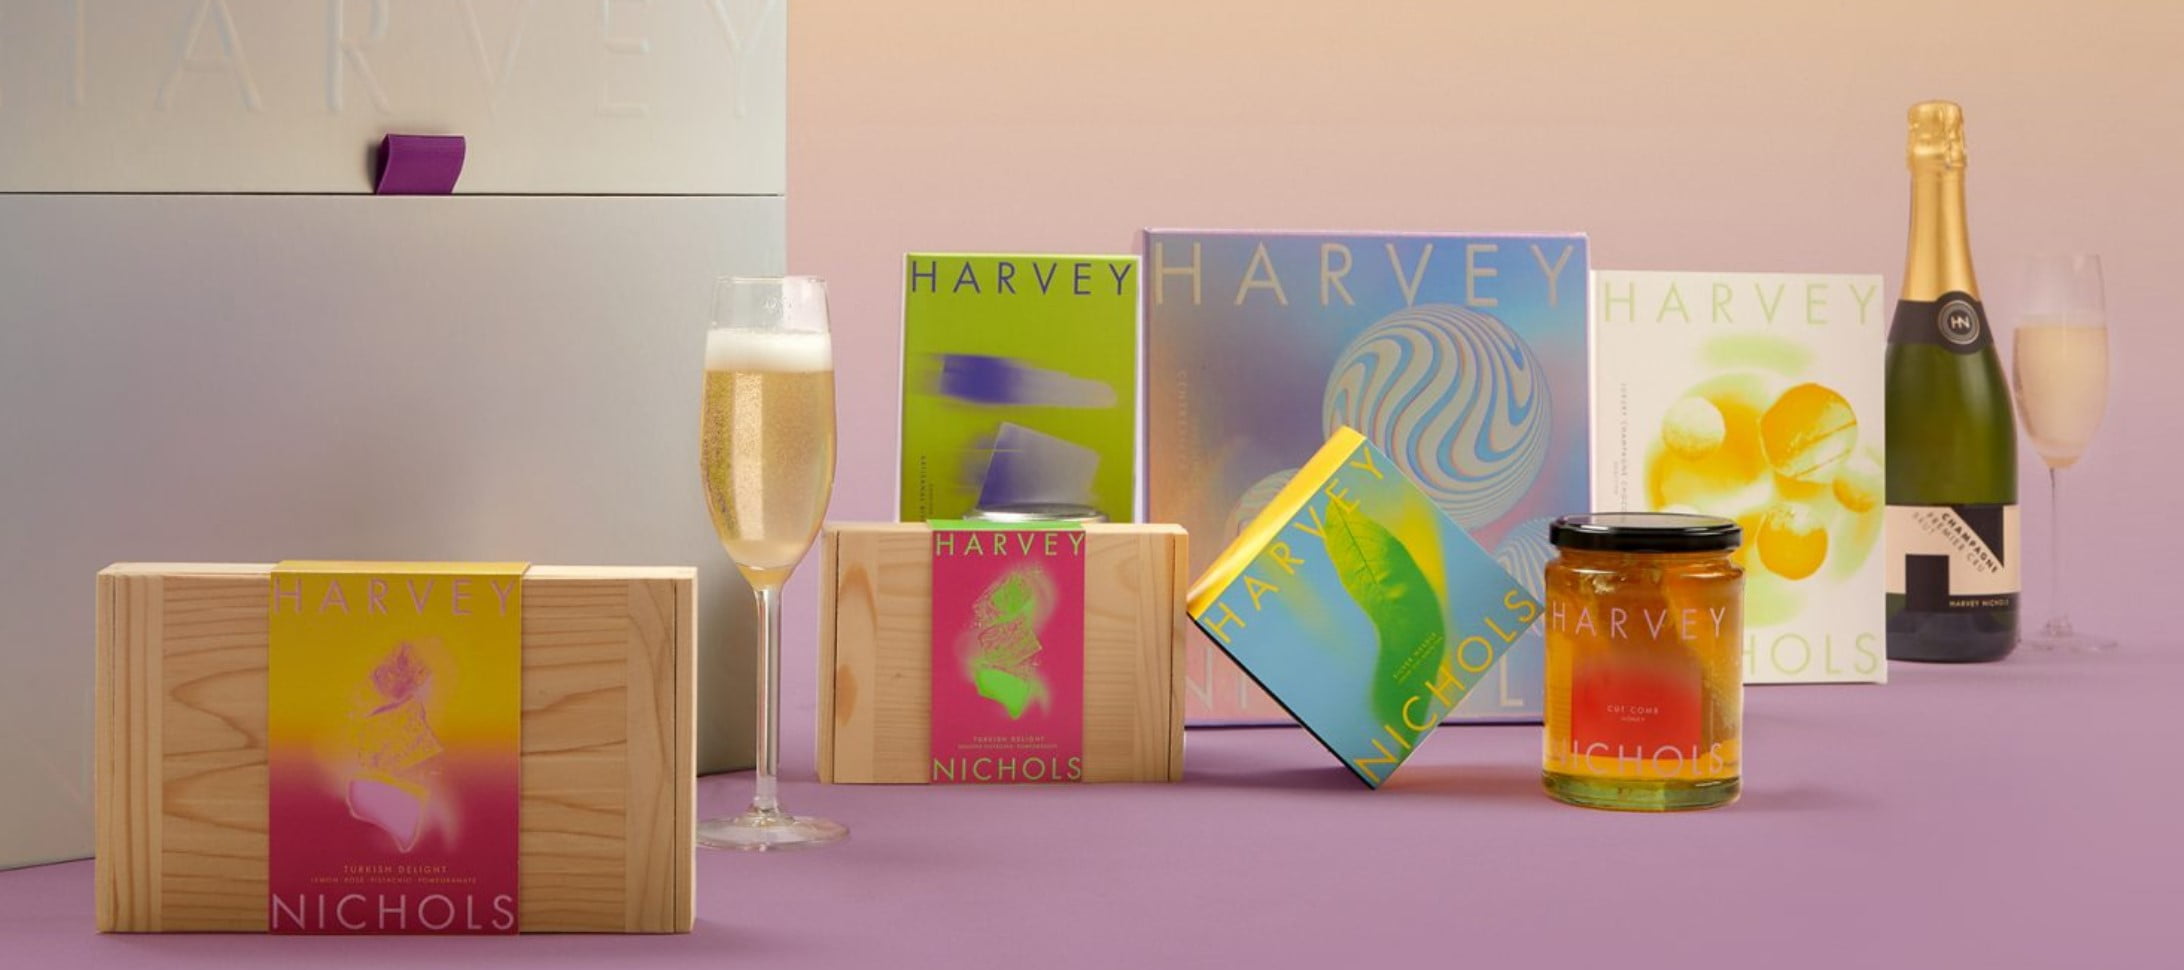 Free delivery on selected luxury hampers and giftboxes at Harvey Nichols